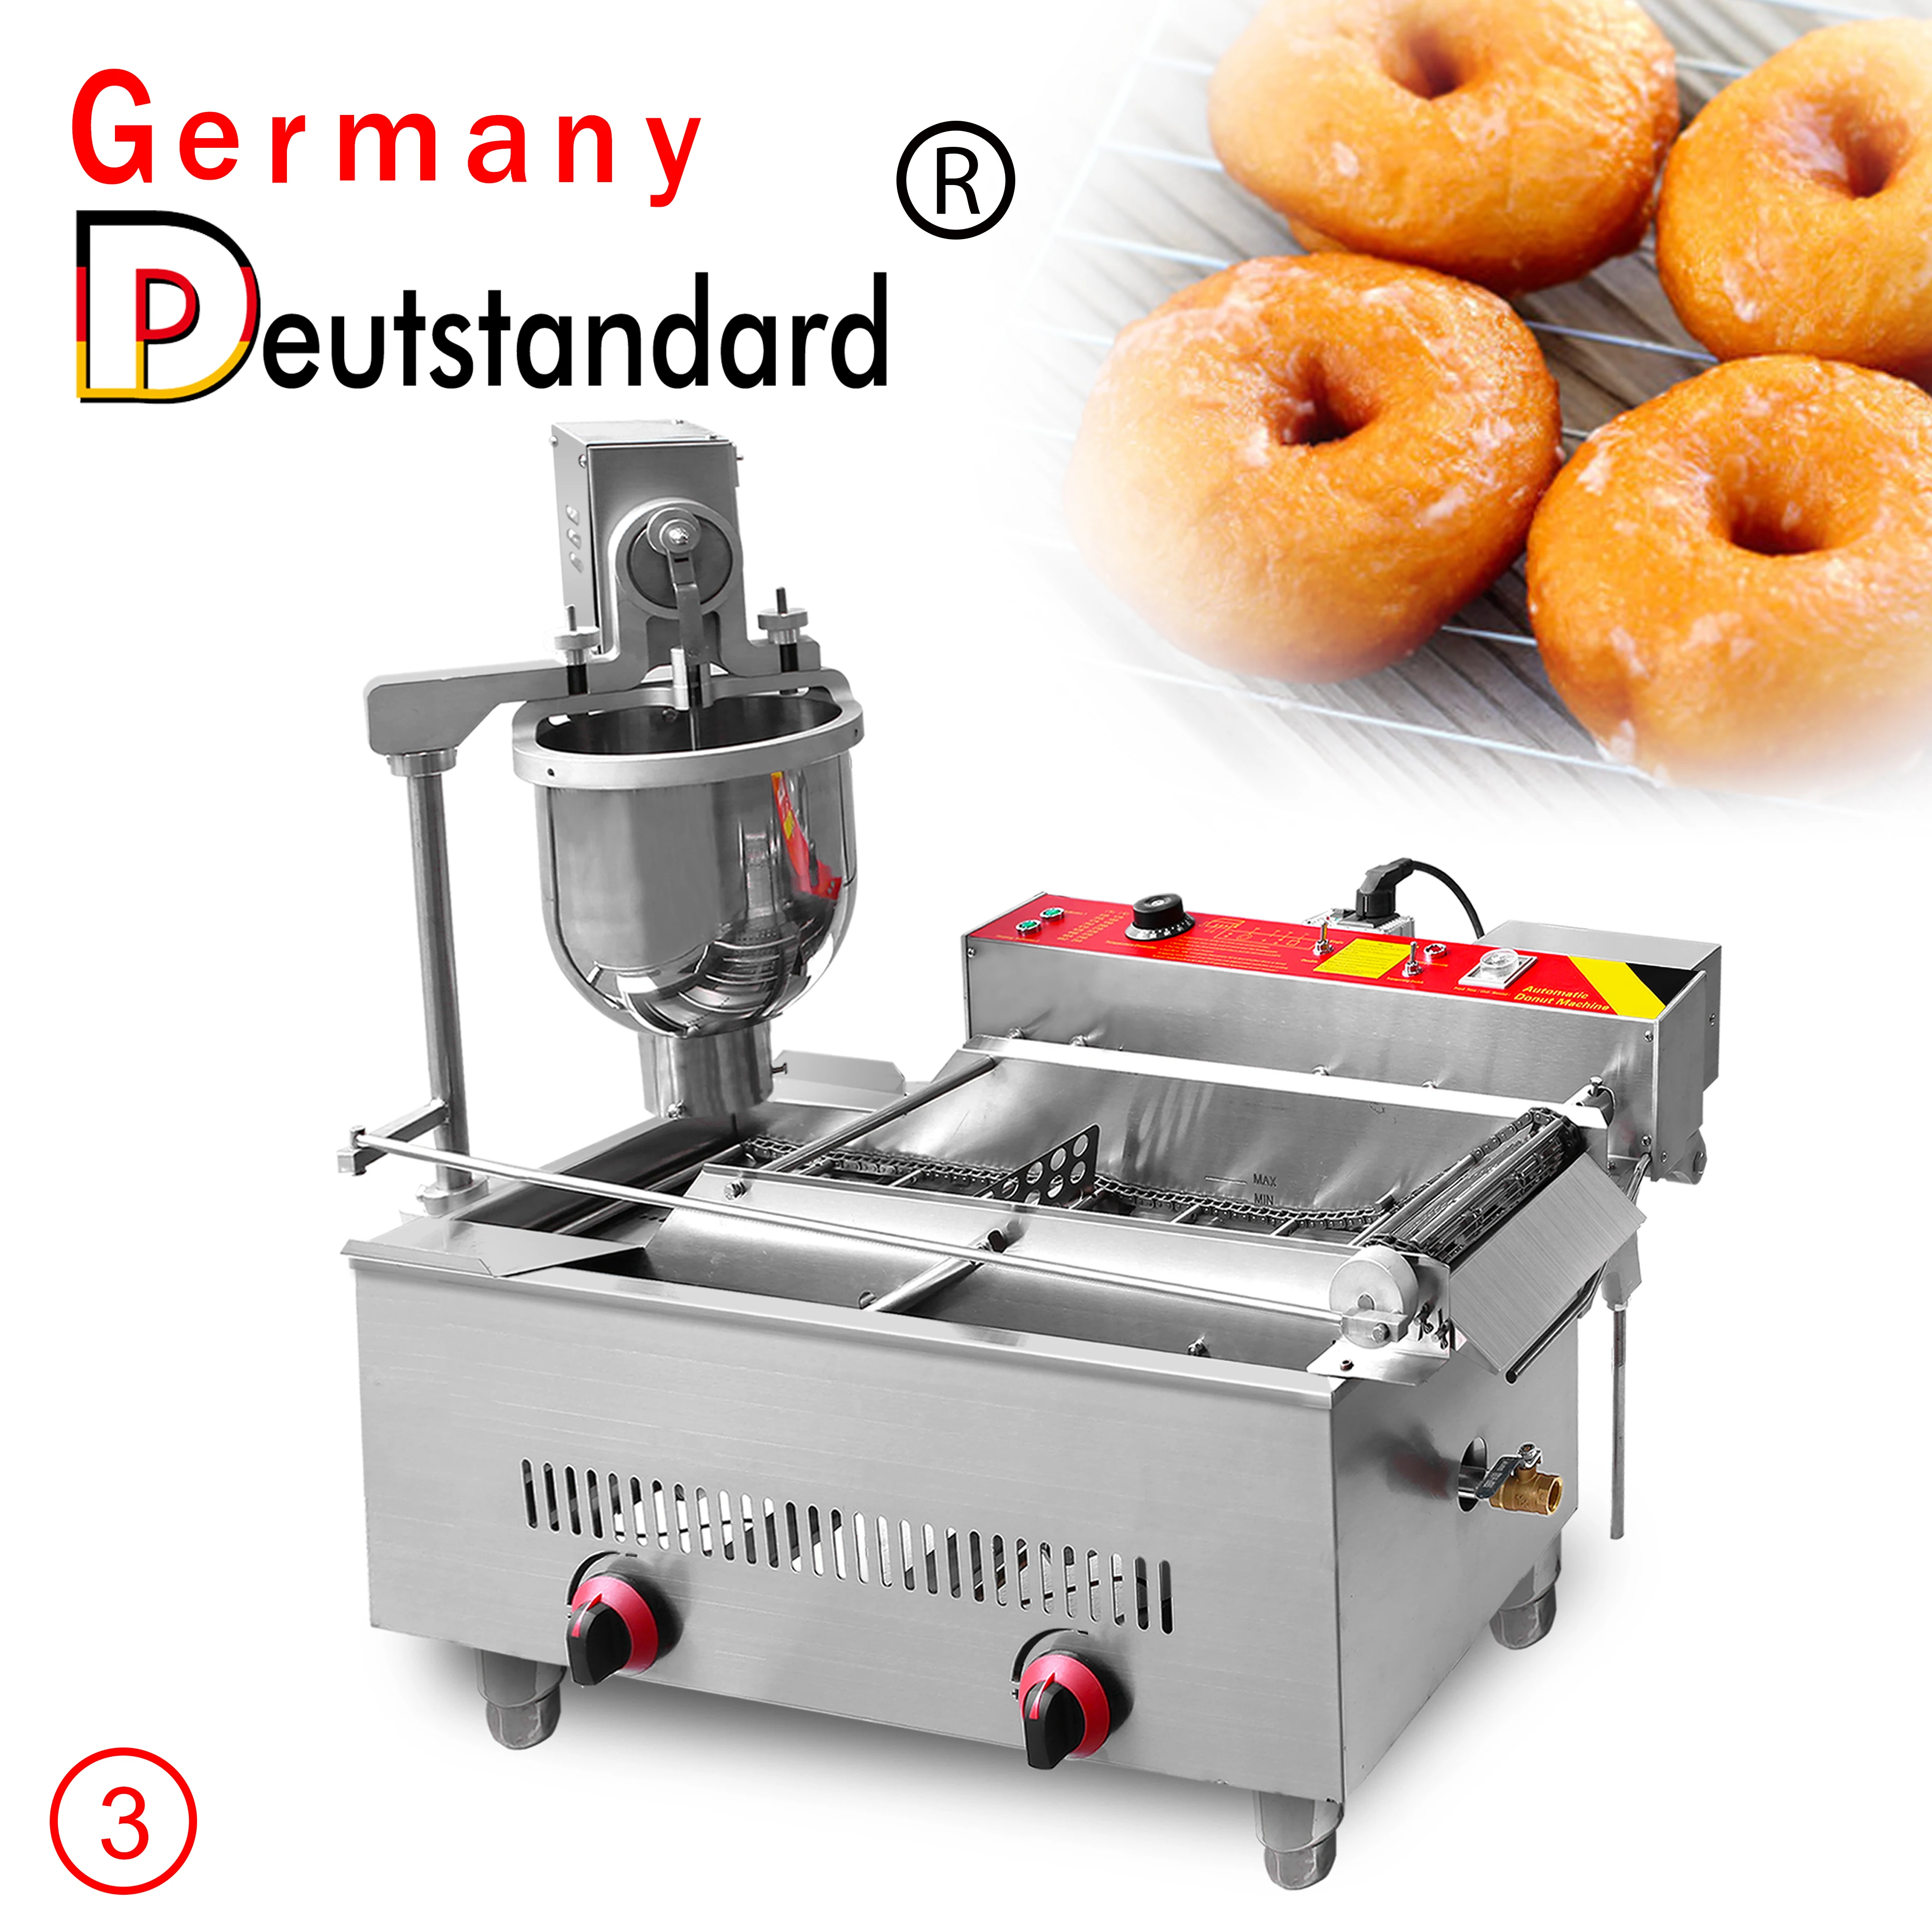 2021 Gas and Electric Automatic Commercial Donut Machine Stainless Steel Mini Fryer Circle Doughnut Maker Industrial With CE 2021 new design air frier 7 liter stainless steel digital air fryer with steam function air toaster oven no oil deep fryer grill